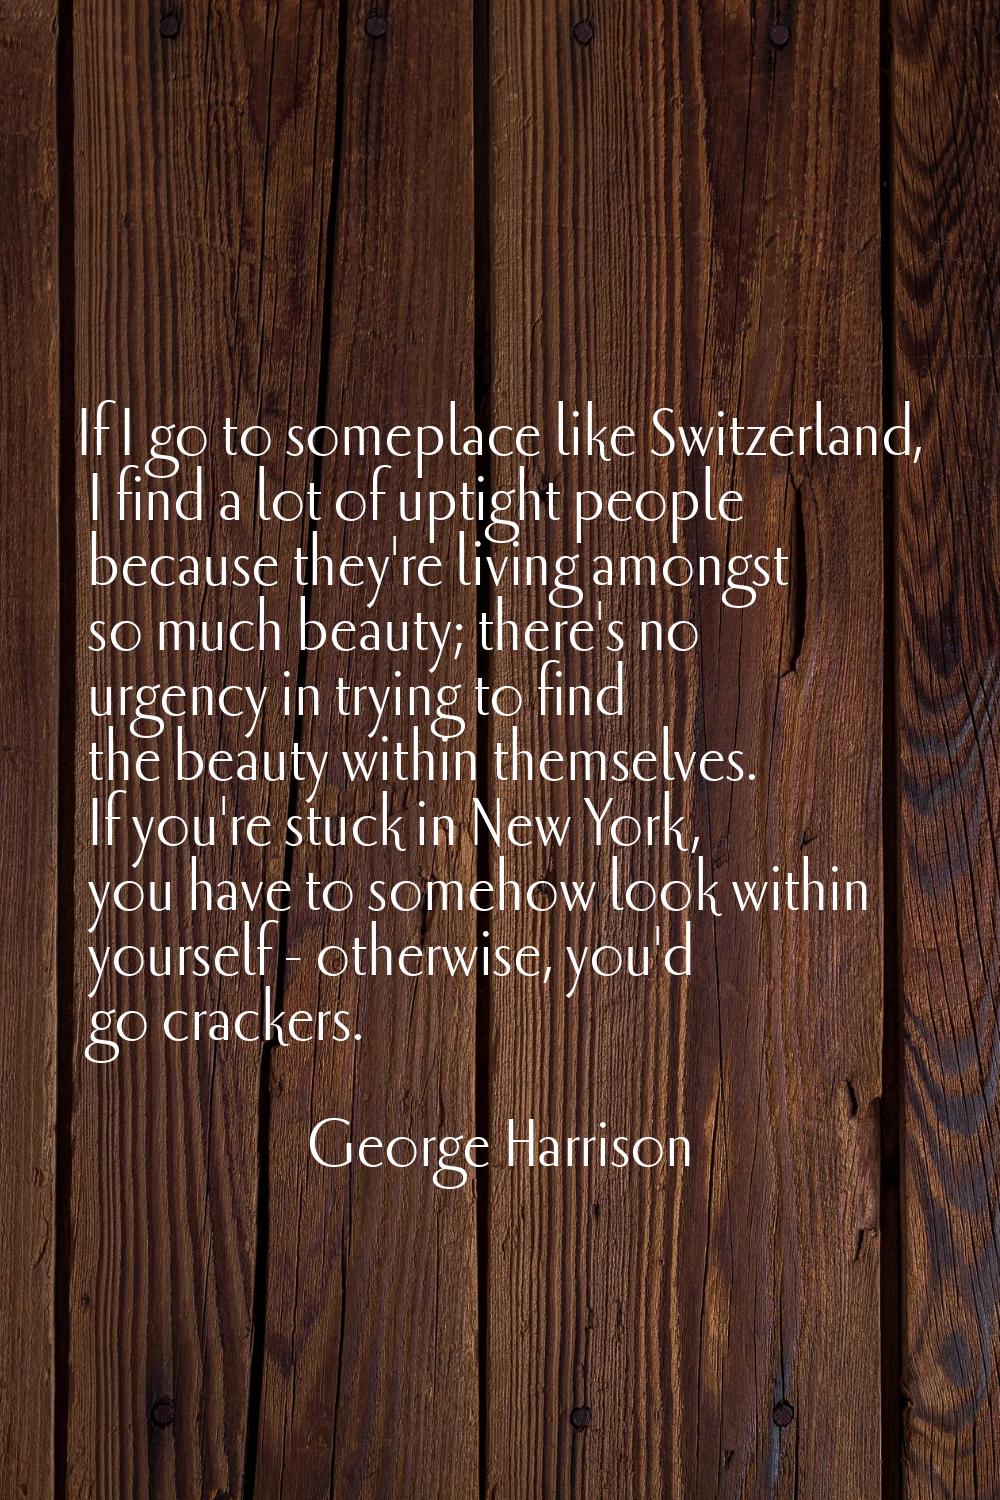 If I go to someplace like Switzerland, I find a lot of uptight people because they're living amongs